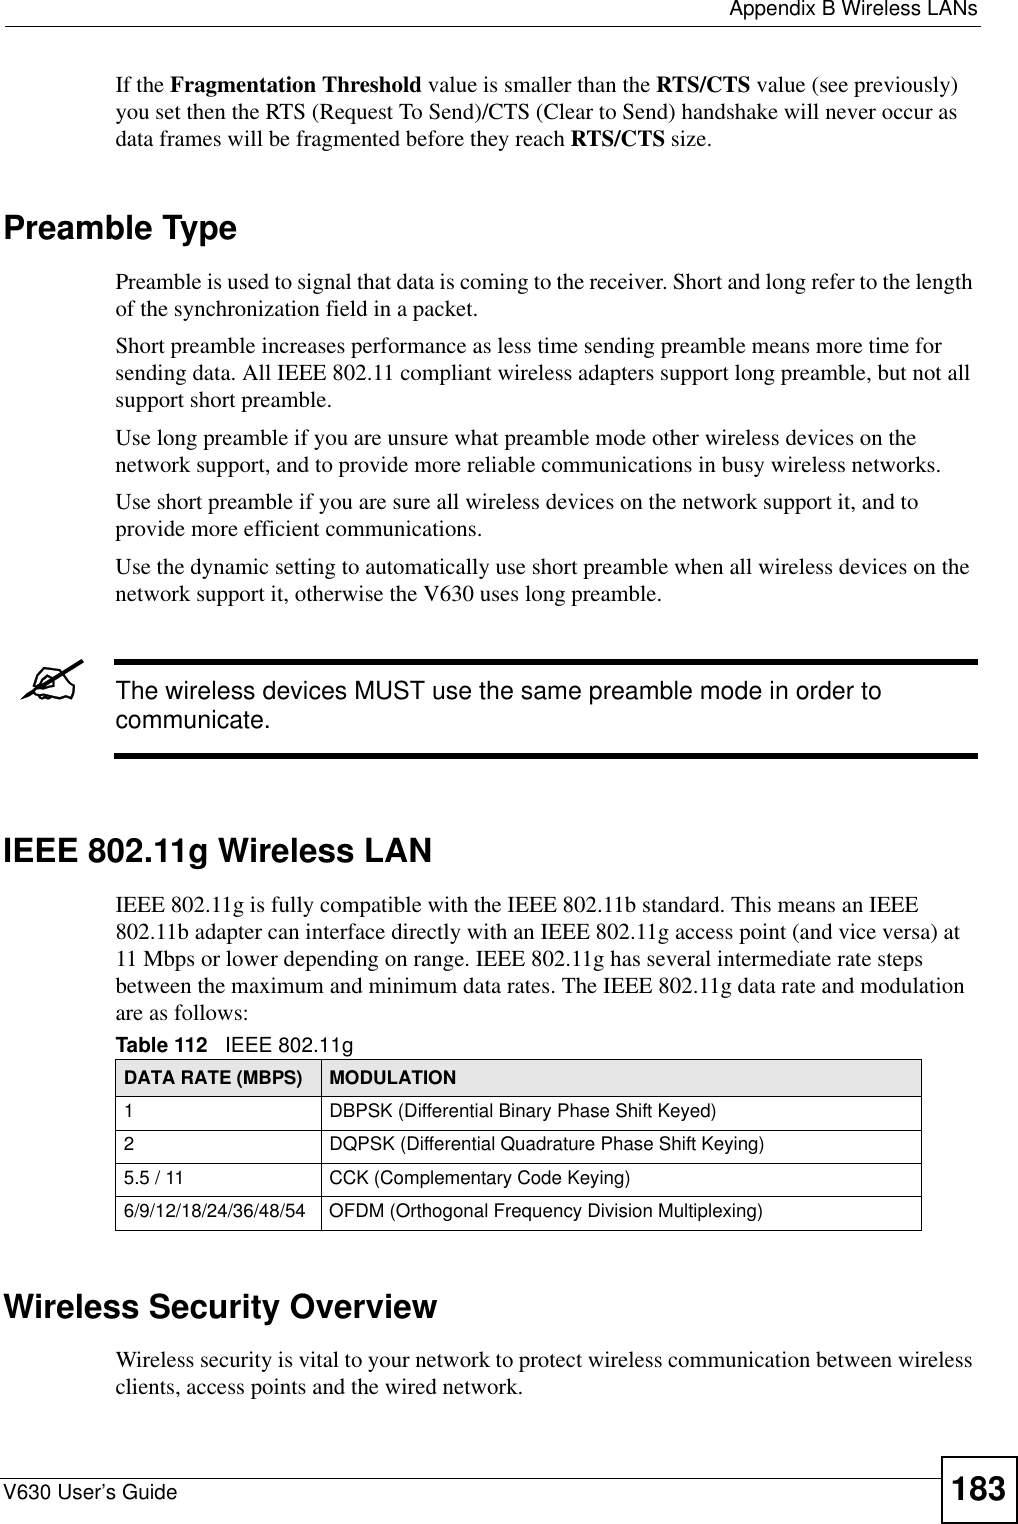  Appendix B Wireless LANsV630 User’s Guide 183If the Fragmentation Threshold value is smaller than the RTS/CTS value (see previously) you set then the RTS (Request To Send)/CTS (Clear to Send) handshake will never occur as data frames will be fragmented before they reach RTS/CTS size.Preamble TypePreamble is used to signal that data is coming to the receiver. Short and long refer to the length of the synchronization field in a packet.Short preamble increases performance as less time sending preamble means more time for sending data. All IEEE 802.11 compliant wireless adapters support long preamble, but not all support short preamble. Use long preamble if you are unsure what preamble mode other wireless devices on the network support, and to provide more reliable communications in busy wireless networks. Use short preamble if you are sure all wireless devices on the network support it, and to provide more efficient communications.Use the dynamic setting to automatically use short preamble when all wireless devices on the network support it, otherwise the V630 uses long preamble.&quot;The wireless devices MUST use the same preamble mode in order to communicate.IEEE 802.11g Wireless LANIEEE 802.11g is fully compatible with the IEEE 802.11b standard. This means an IEEE 802.11b adapter can interface directly with an IEEE 802.11g access point (and vice versa) at 11 Mbps or lower depending on range. IEEE 802.11g has several intermediate rate steps between the maximum and minimum data rates. The IEEE 802.11g data rate and modulation are as follows:Wireless Security OverviewWireless security is vital to your network to protect wireless communication between wireless clients, access points and the wired network.Table 112   IEEE 802.11gDATA RATE (MBPS) MODULATION1 DBPSK (Differential Binary Phase Shift Keyed)2 DQPSK (Differential Quadrature Phase Shift Keying)5.5 / 11 CCK (Complementary Code Keying) 6/9/12/18/24/36/48/54 OFDM (Orthogonal Frequency Division Multiplexing) 